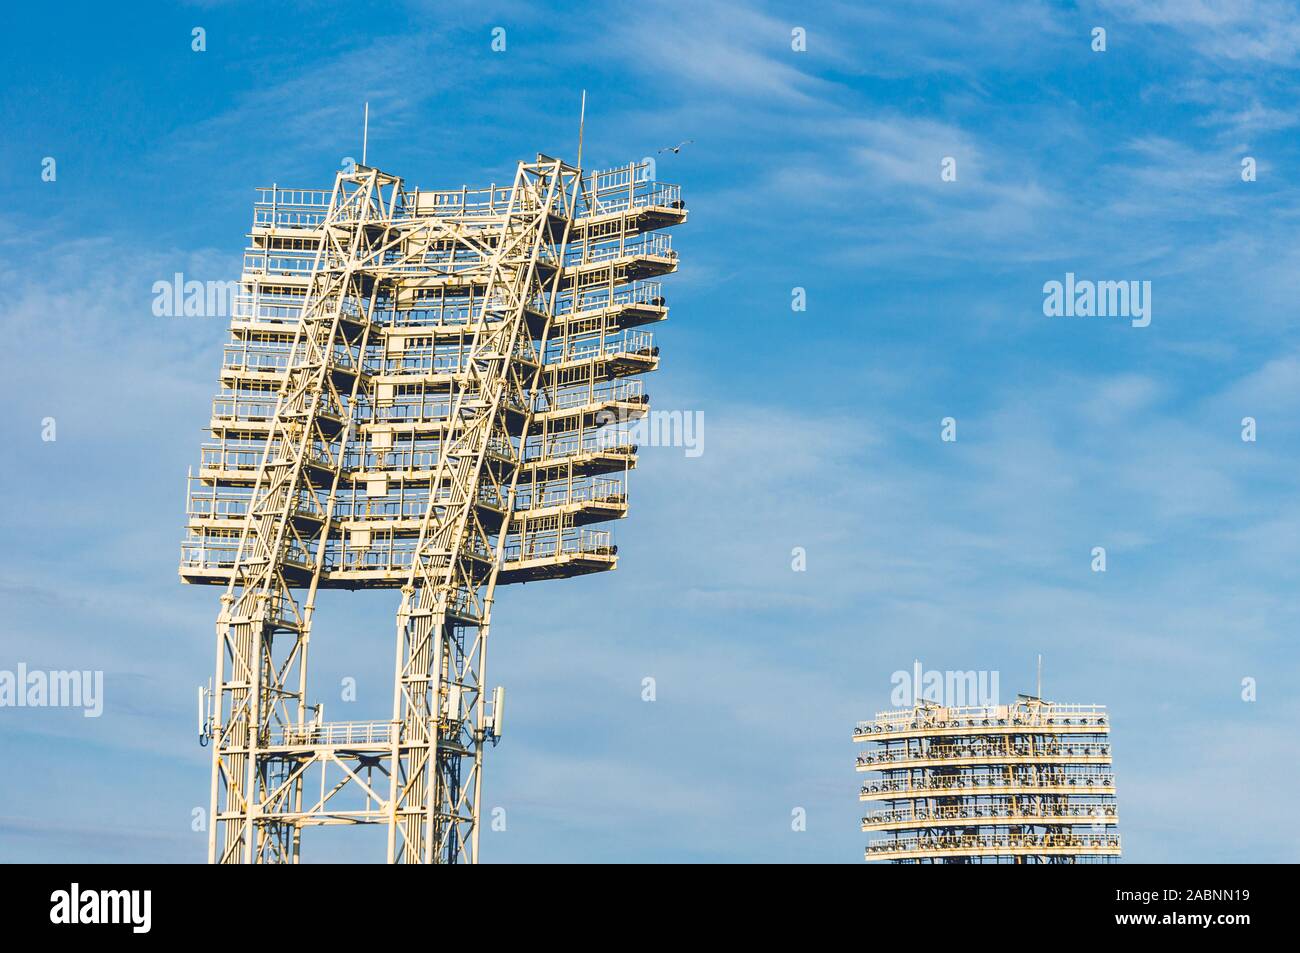 Stadium lights towers in the daytime against blue sky Stock Photo